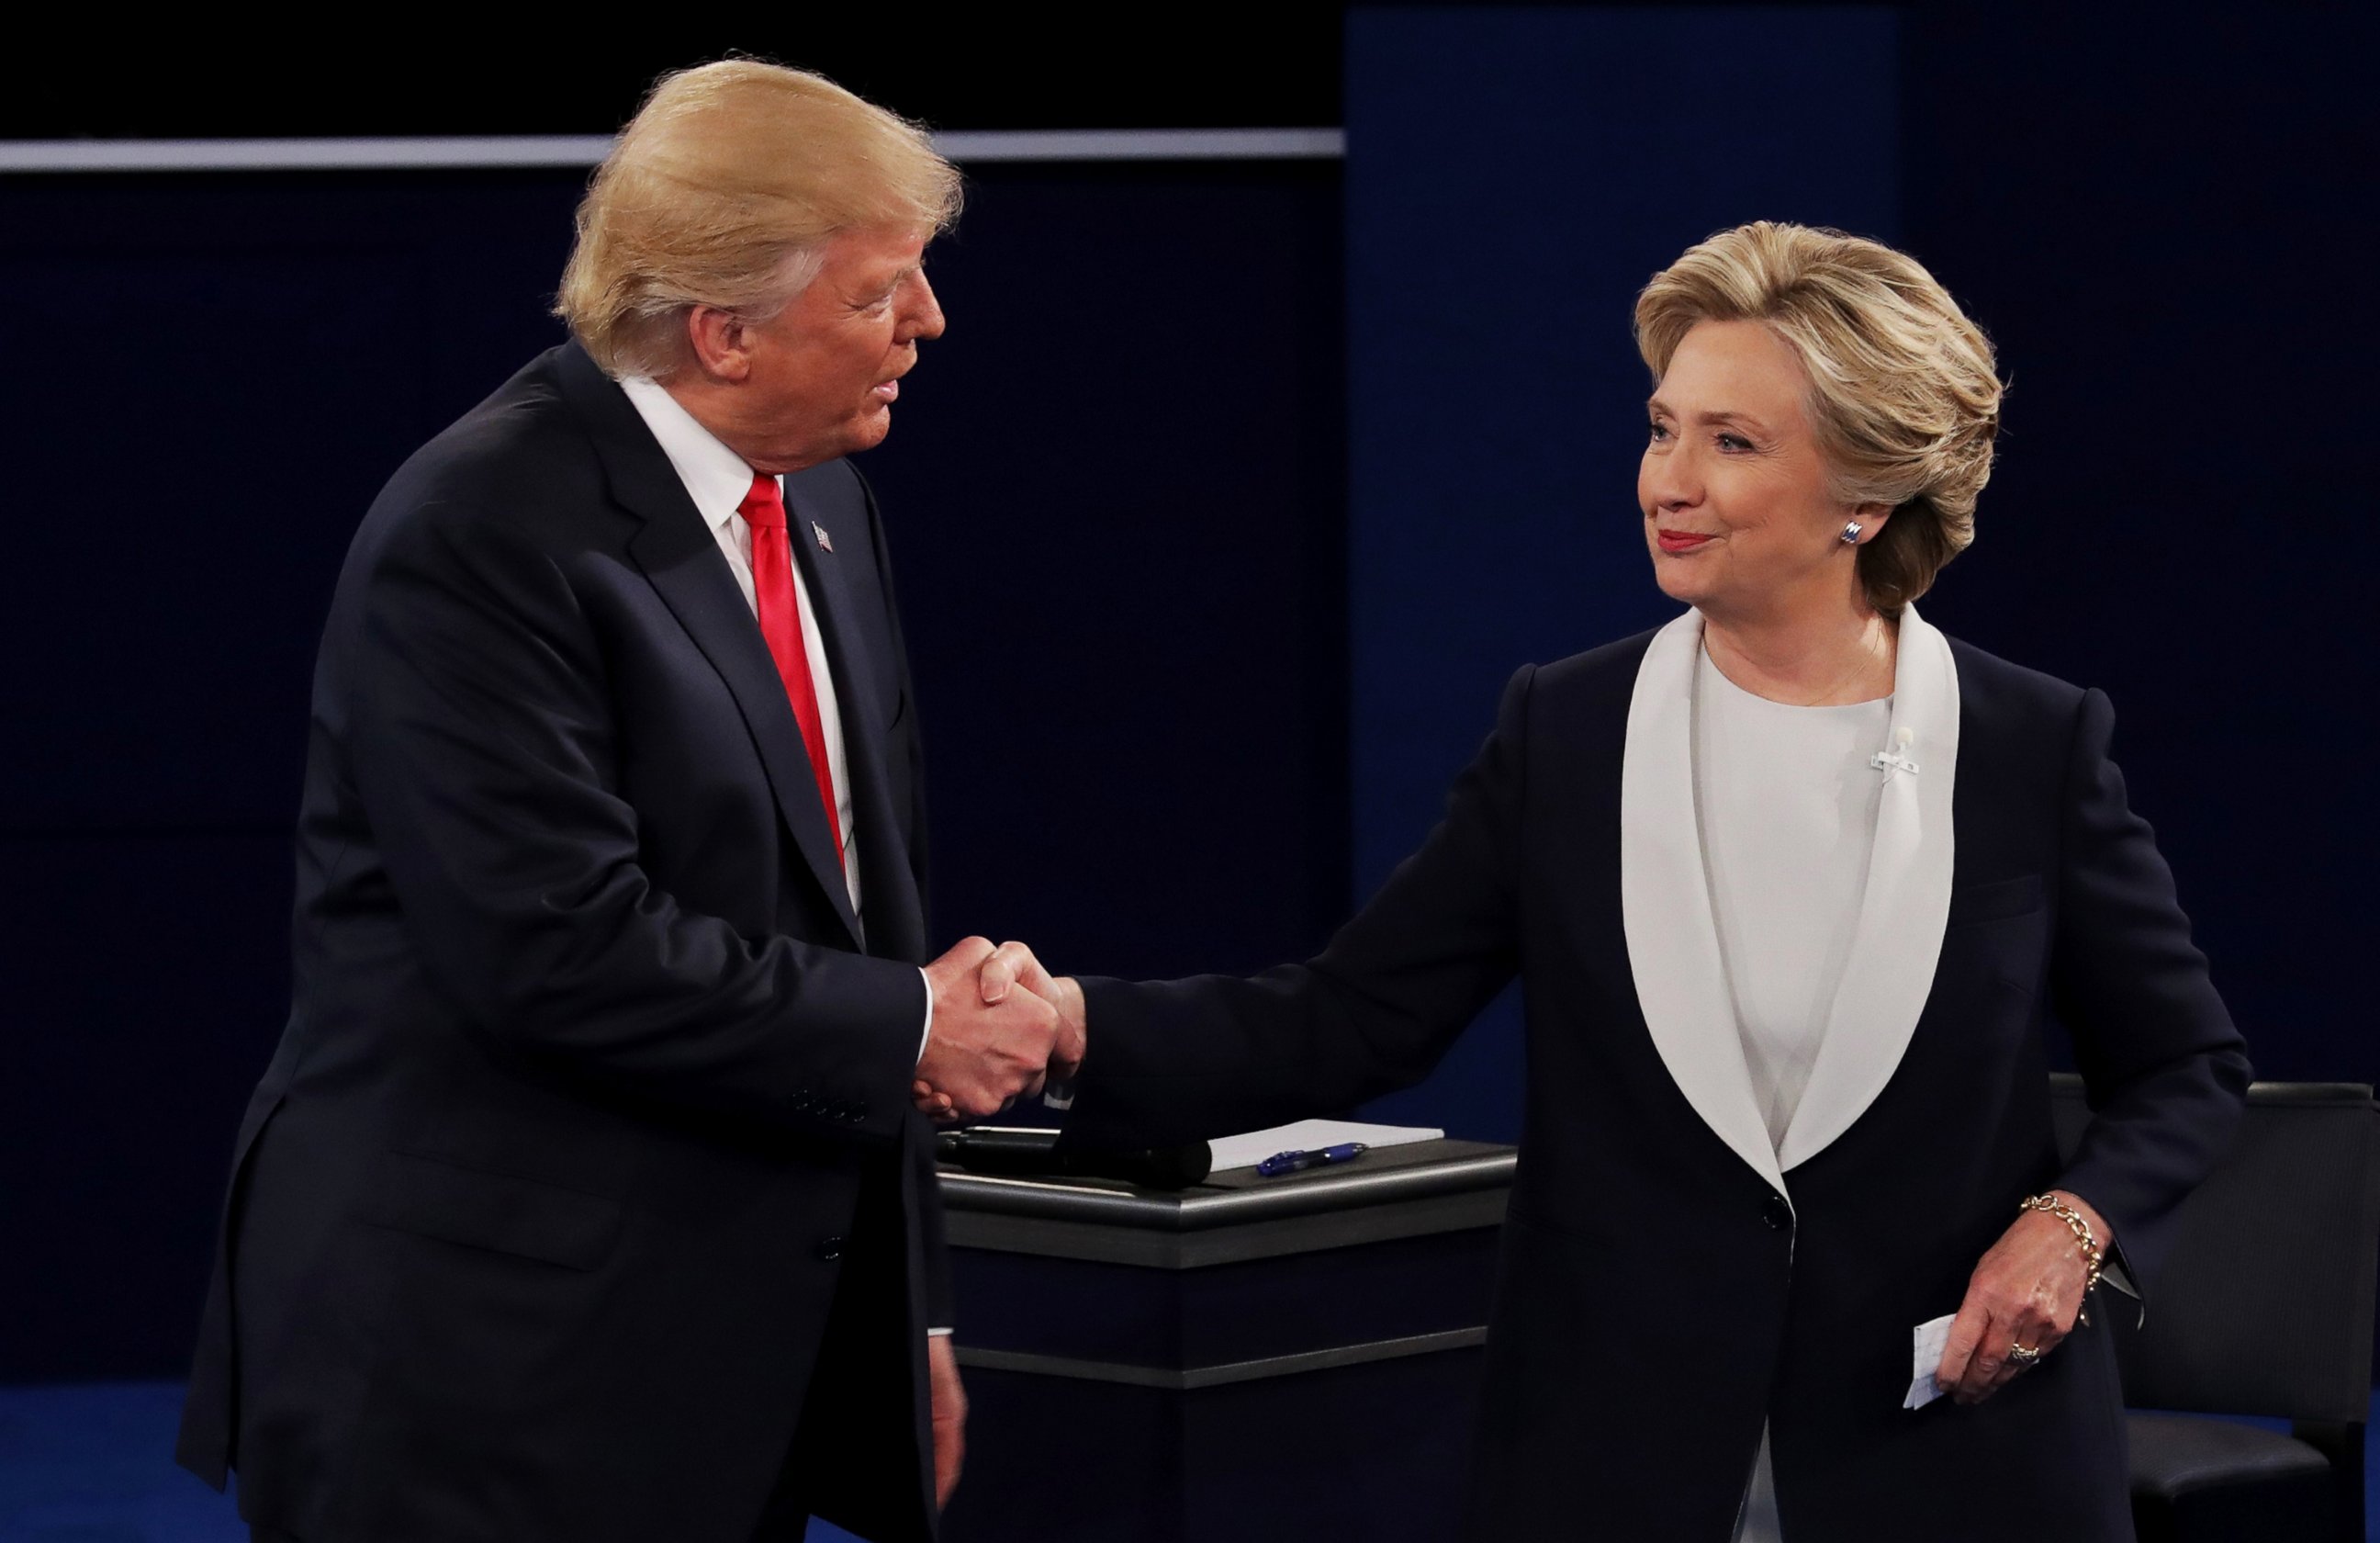 PHOTO: Donald Trump shakes hands with Hillary Clinton during the town hall debate at Washington University on Oct. 9, 2016 in St Louis, Missouri. 